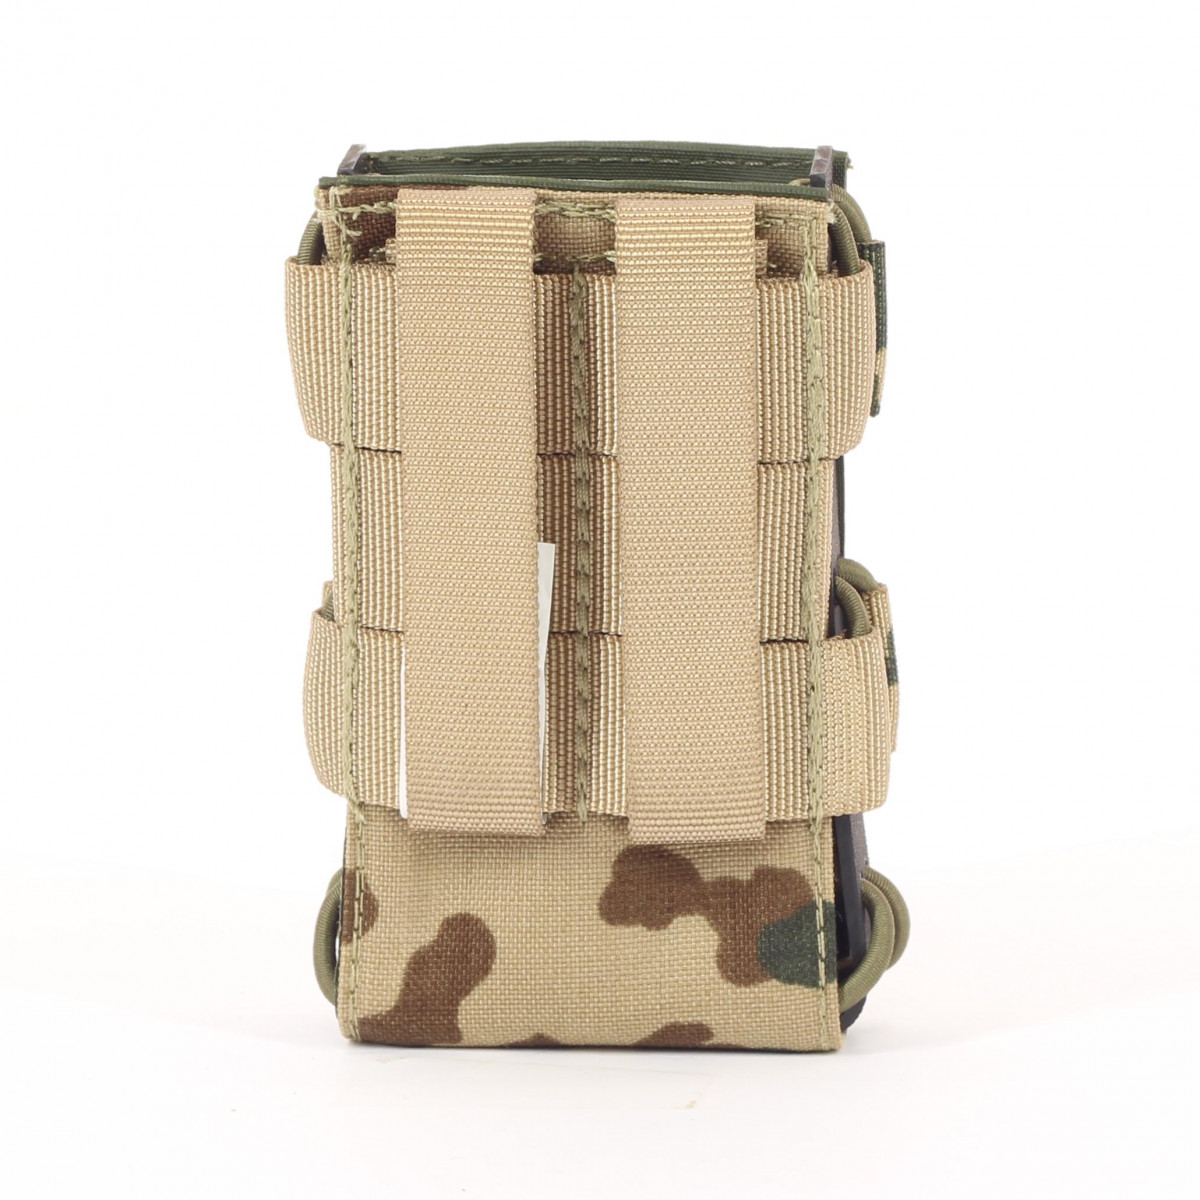 Quick-draw magazine pouch M4 in tropical camouflage